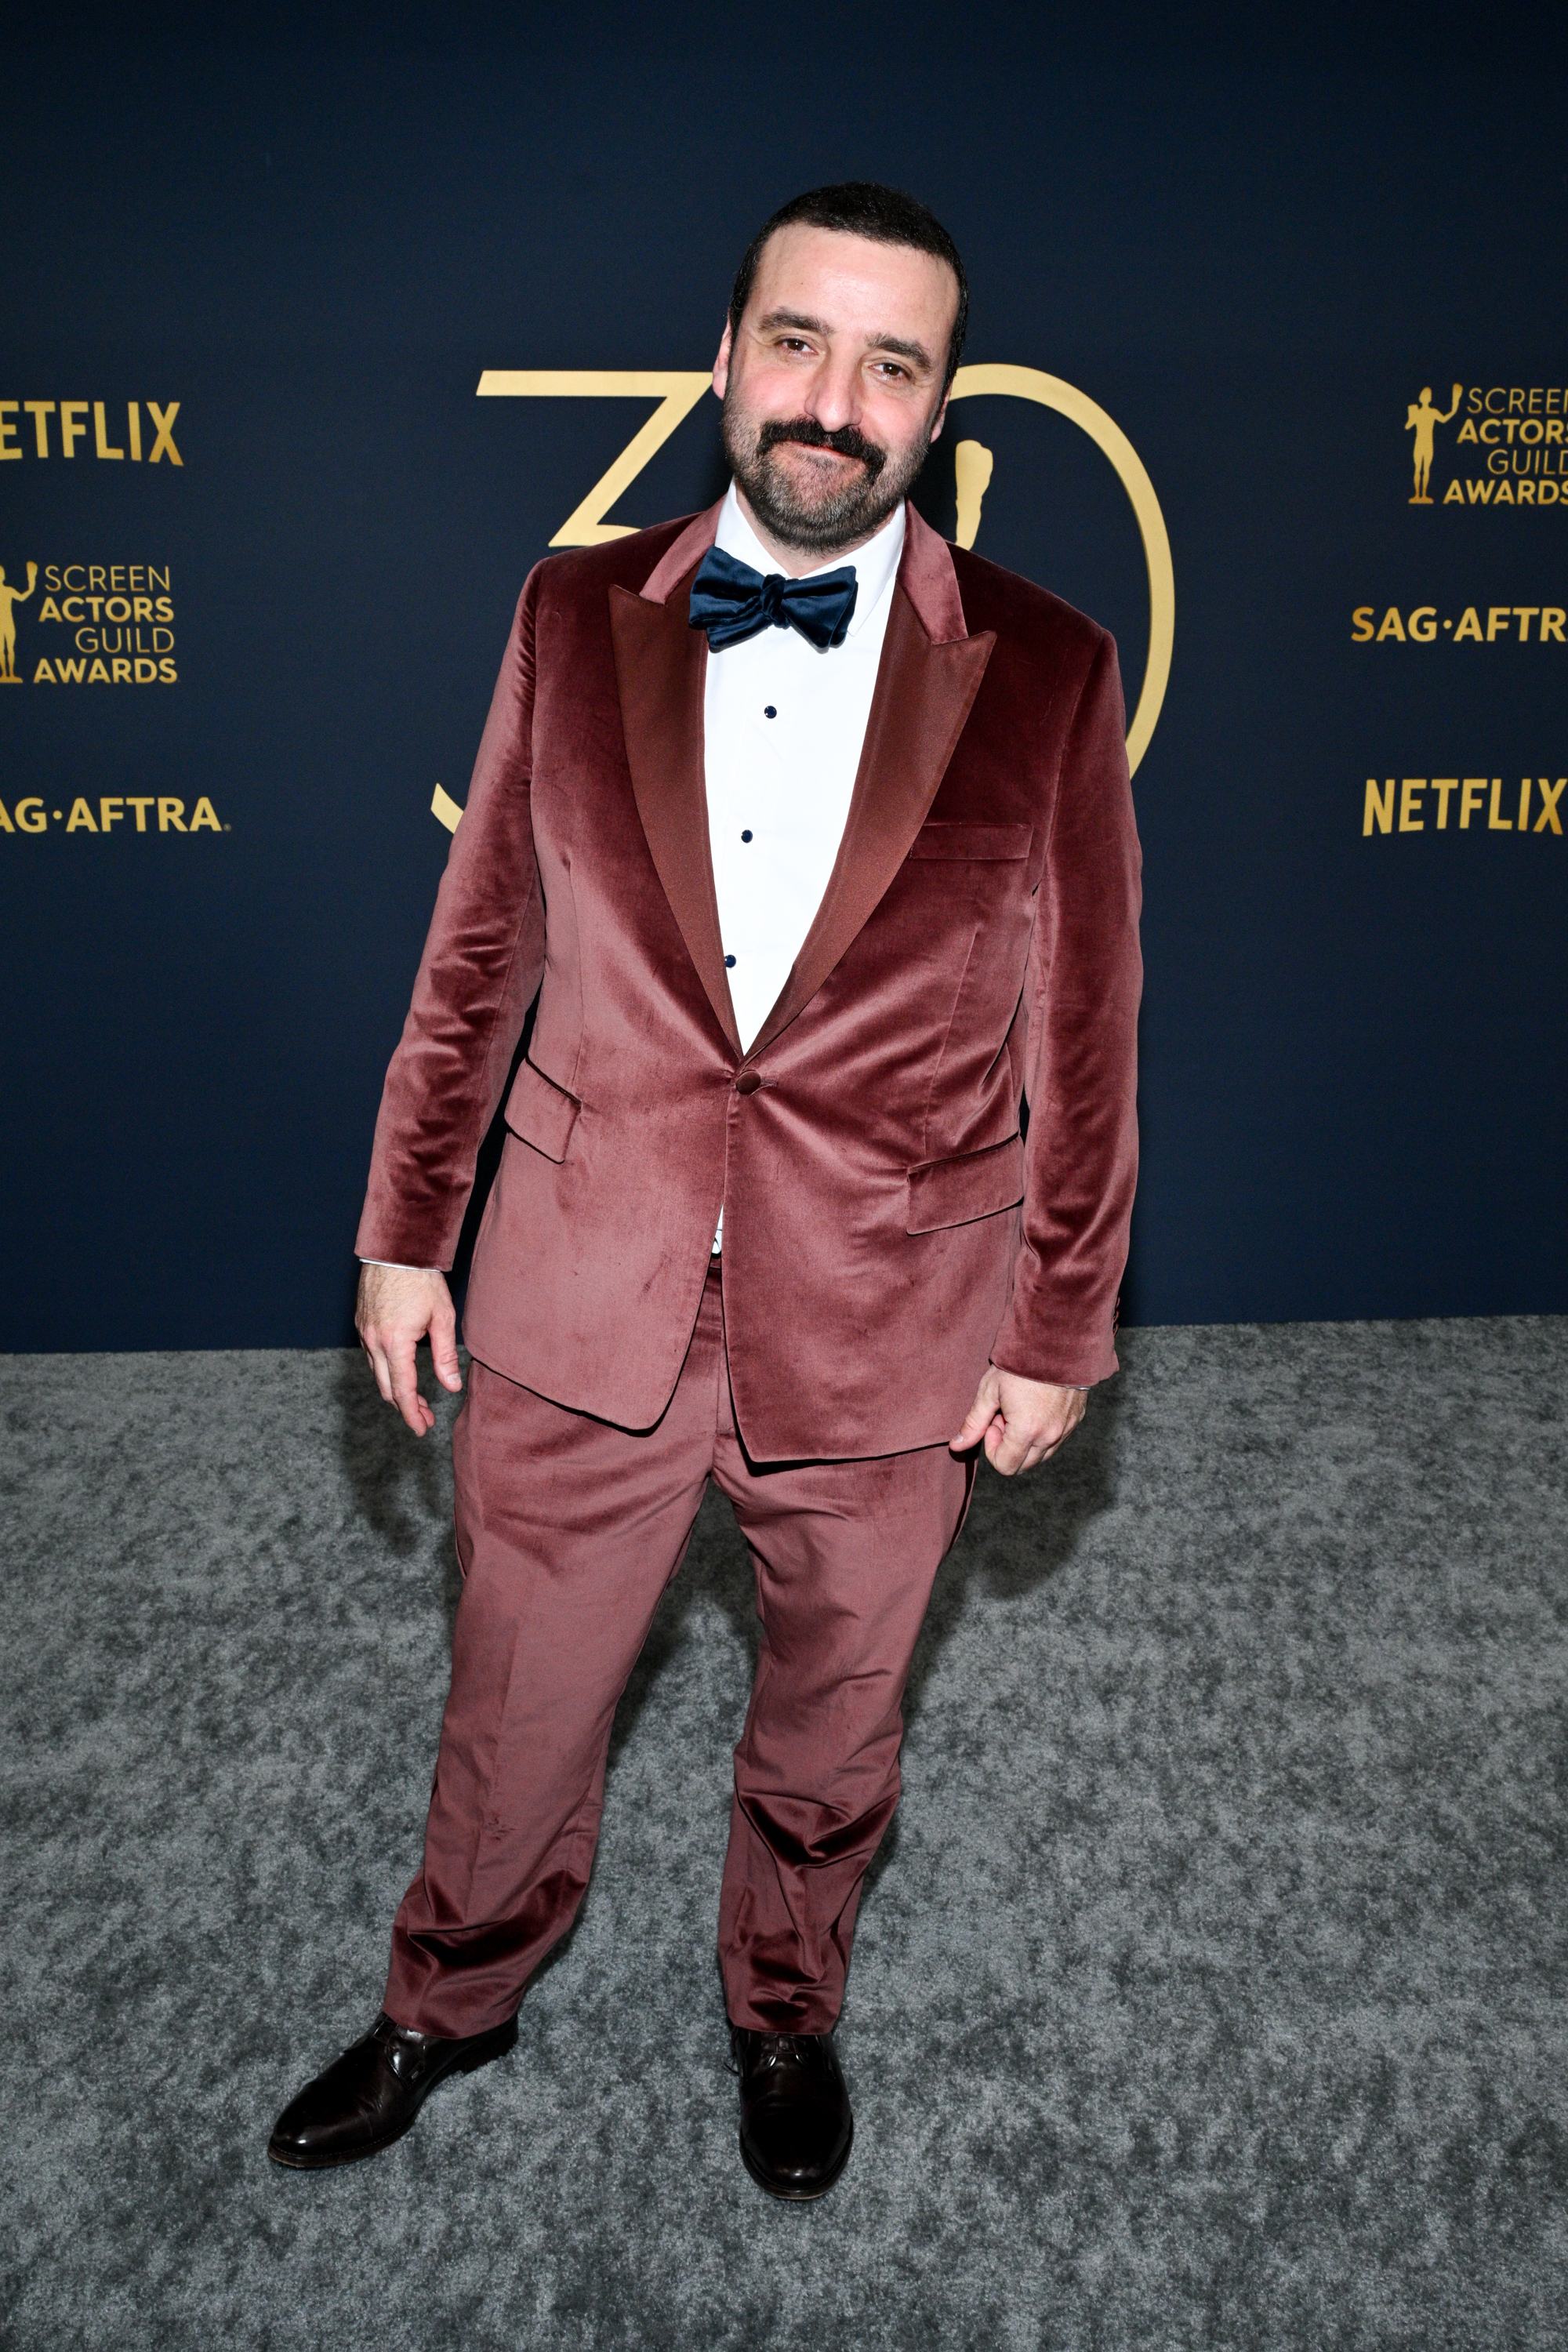 He&#x27;s in a crushed velvet suit with bow tie standing on event carpet